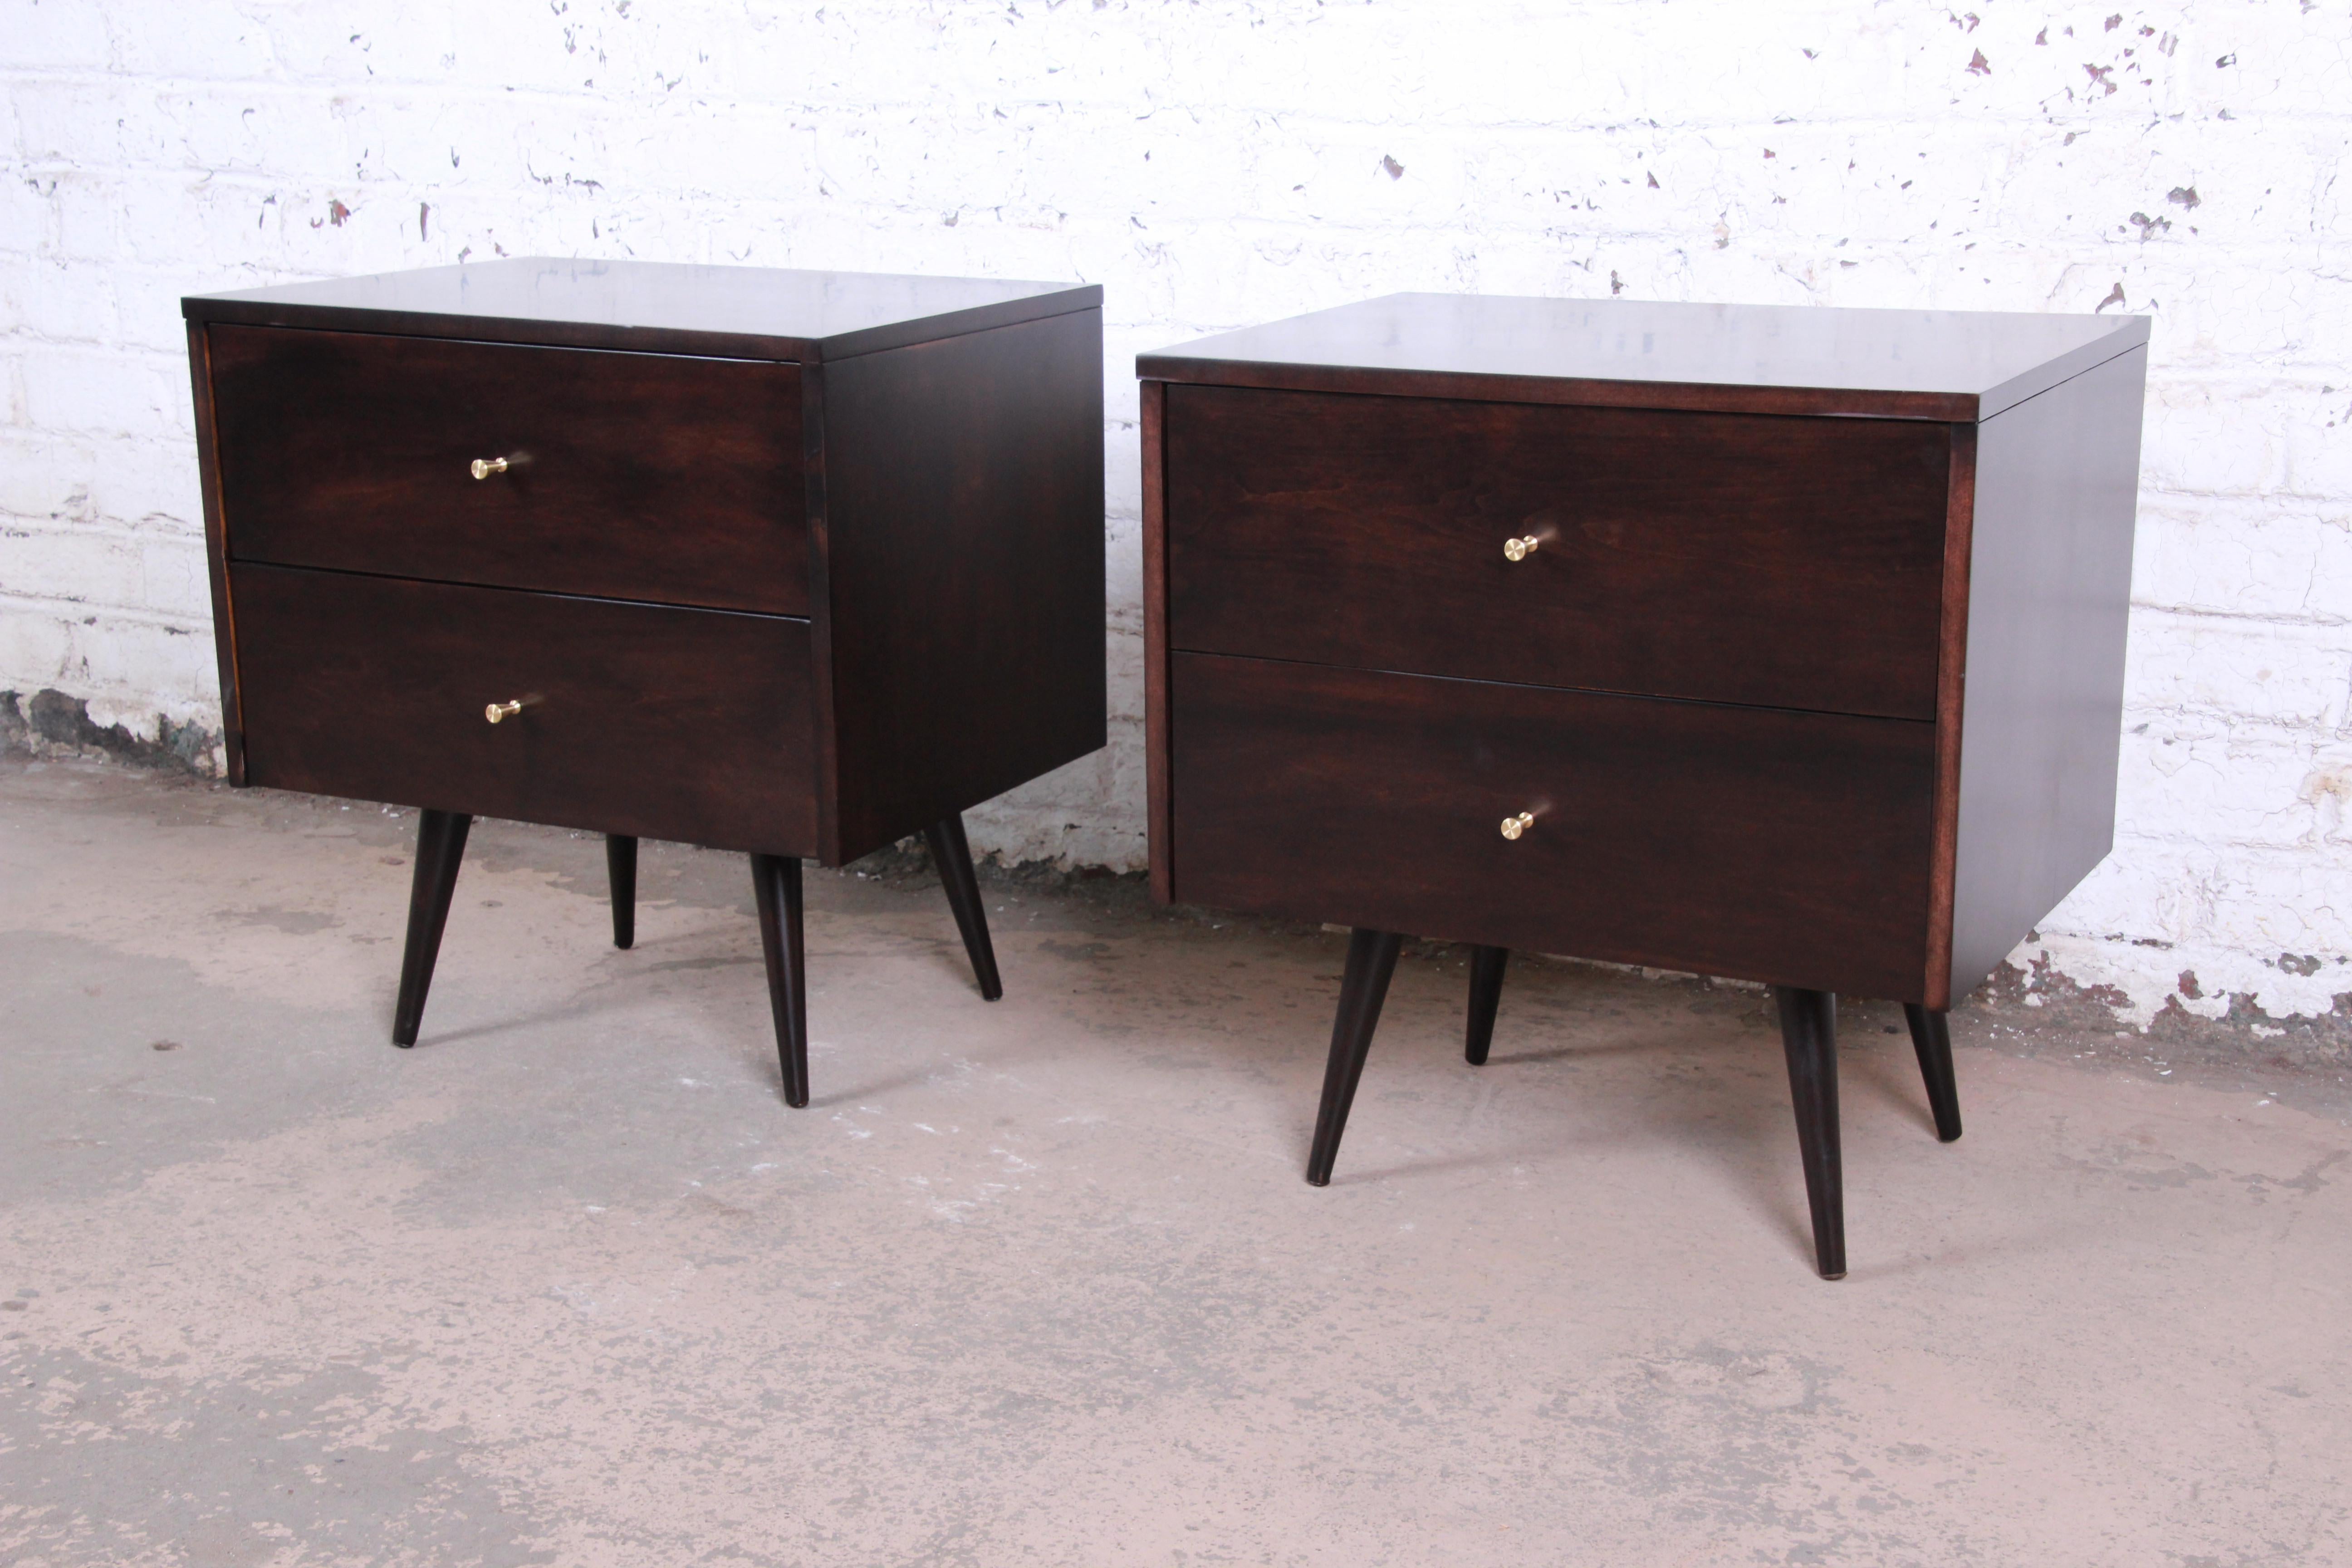 An exceptional pair of Mid-Century Modern nightstands designed by Paul McCobb for his Planner Group line for Winchendon Furniture. The nightstands feature solid birch construction, with gorgeous wood grain and sleek, Minimalist mid-century design.